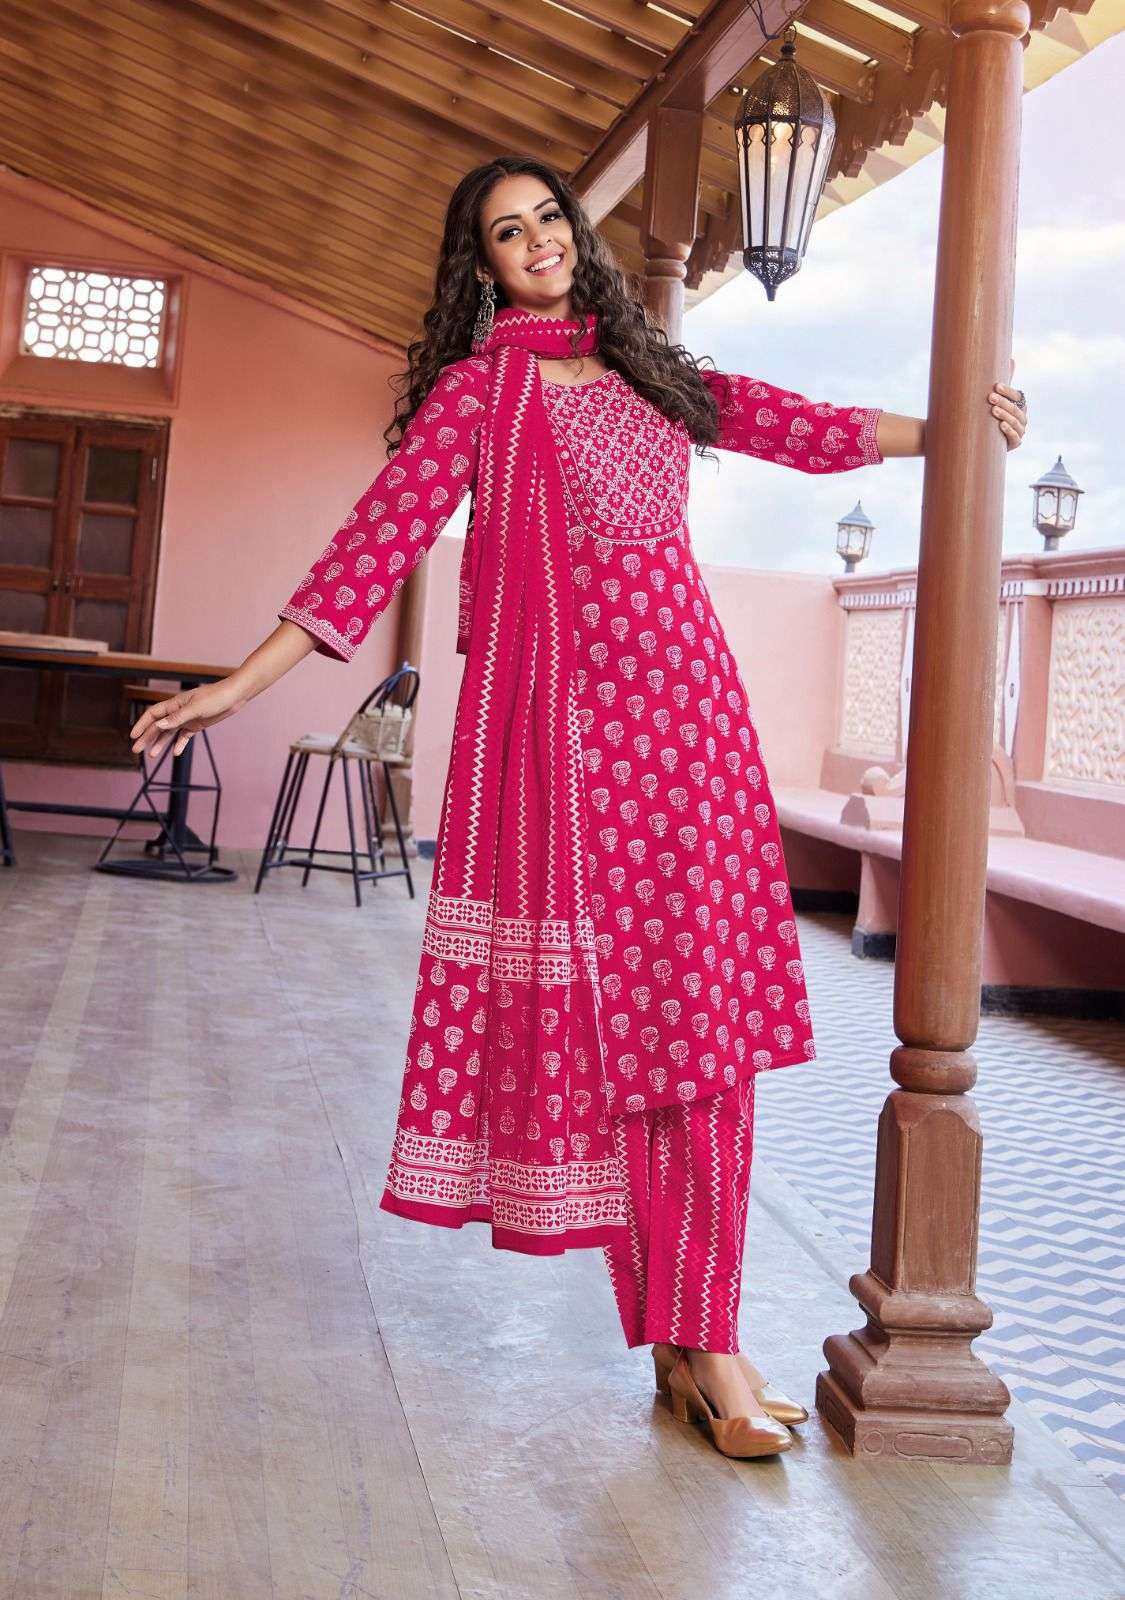 Dollar Vol-2 By Ladies Flavour 1001 To 1004 Series Beautiful Suits Colorful Stylish Fancy Casual Wear & Ethnic Wear Pure Cotton Dresses At Wholesale Price